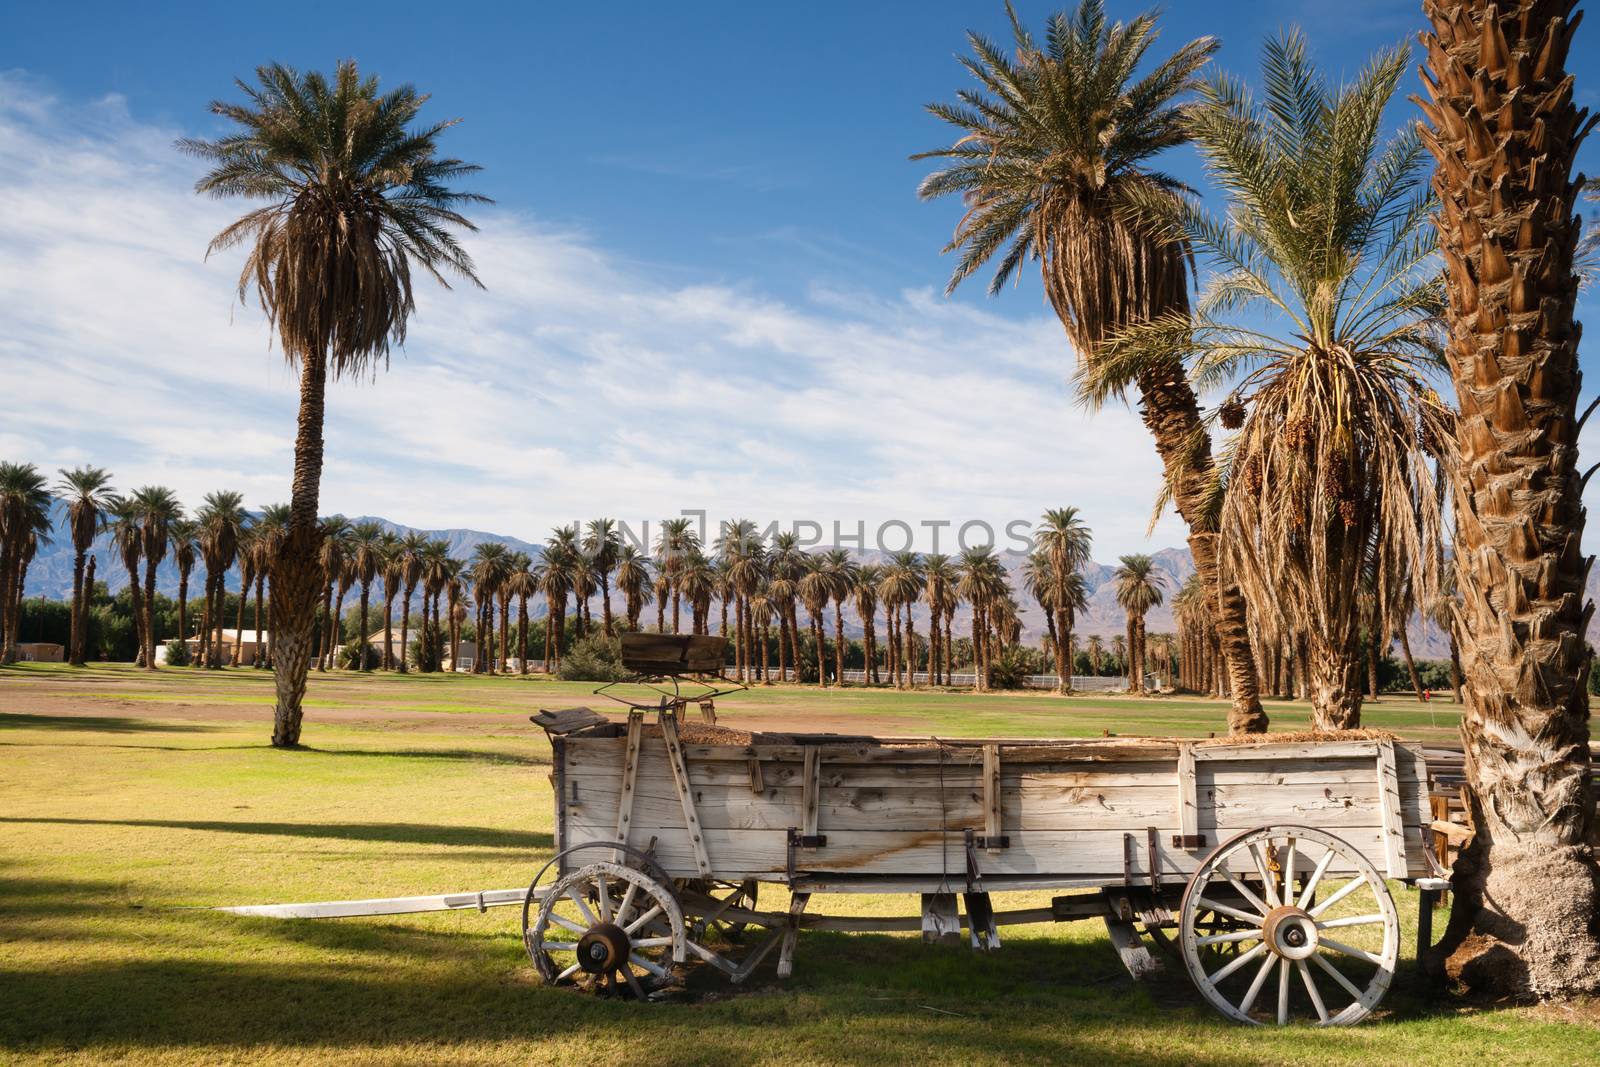 Old Buckboard Covered Wagon Palm Tree Oasis Death Valley by ChrisBoswell